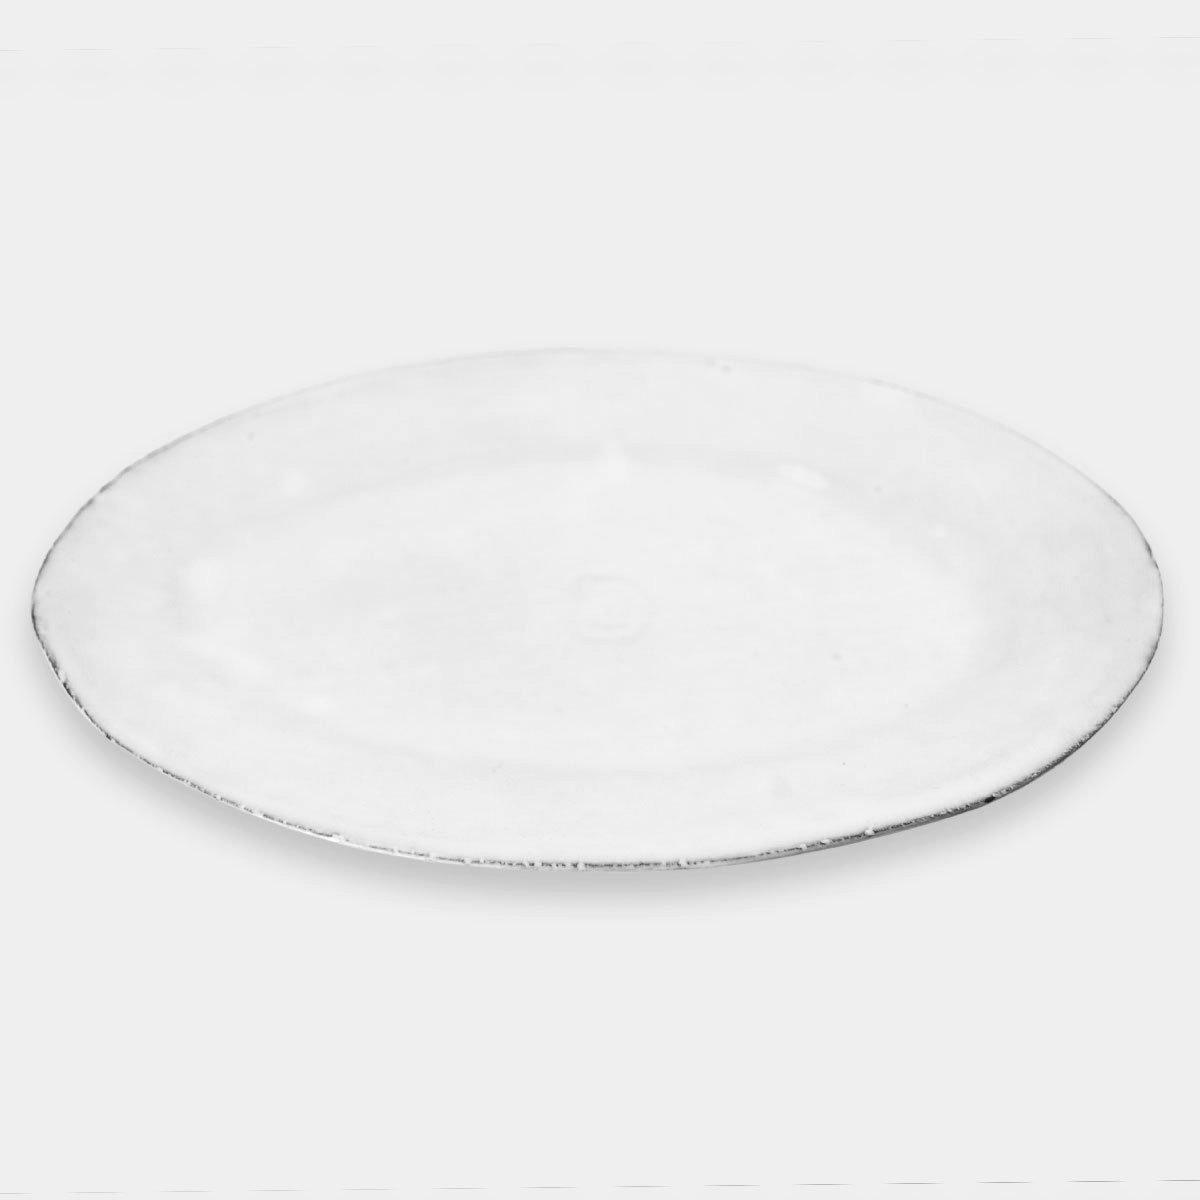 Paris oval platter-Handmade in France by CARRON